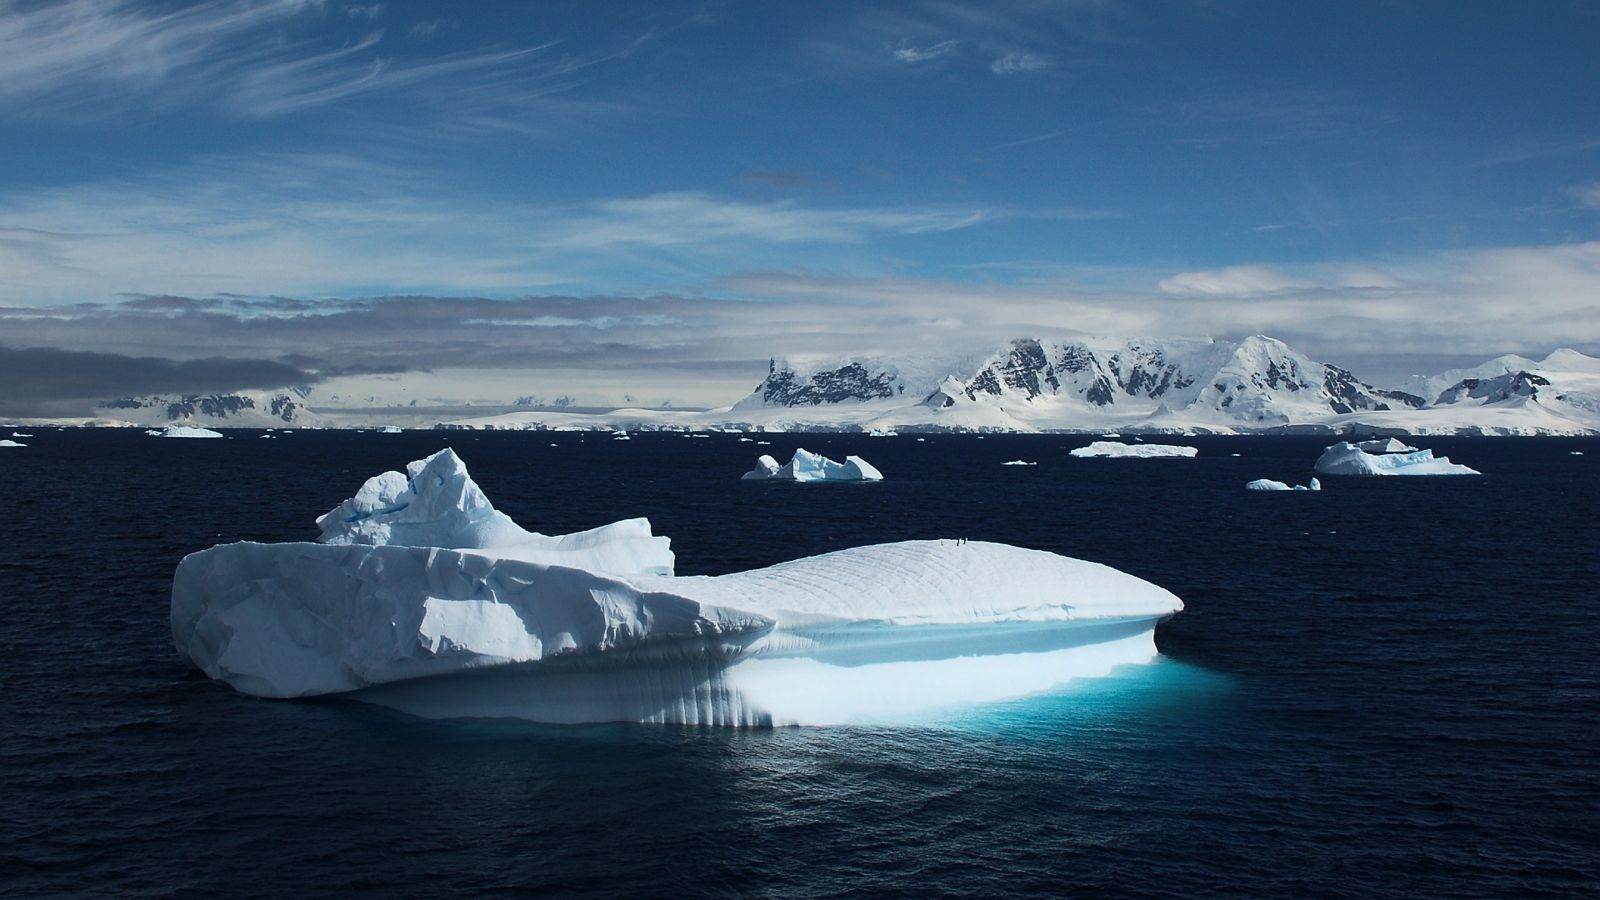 Iceberg in water with mountain range in the background.